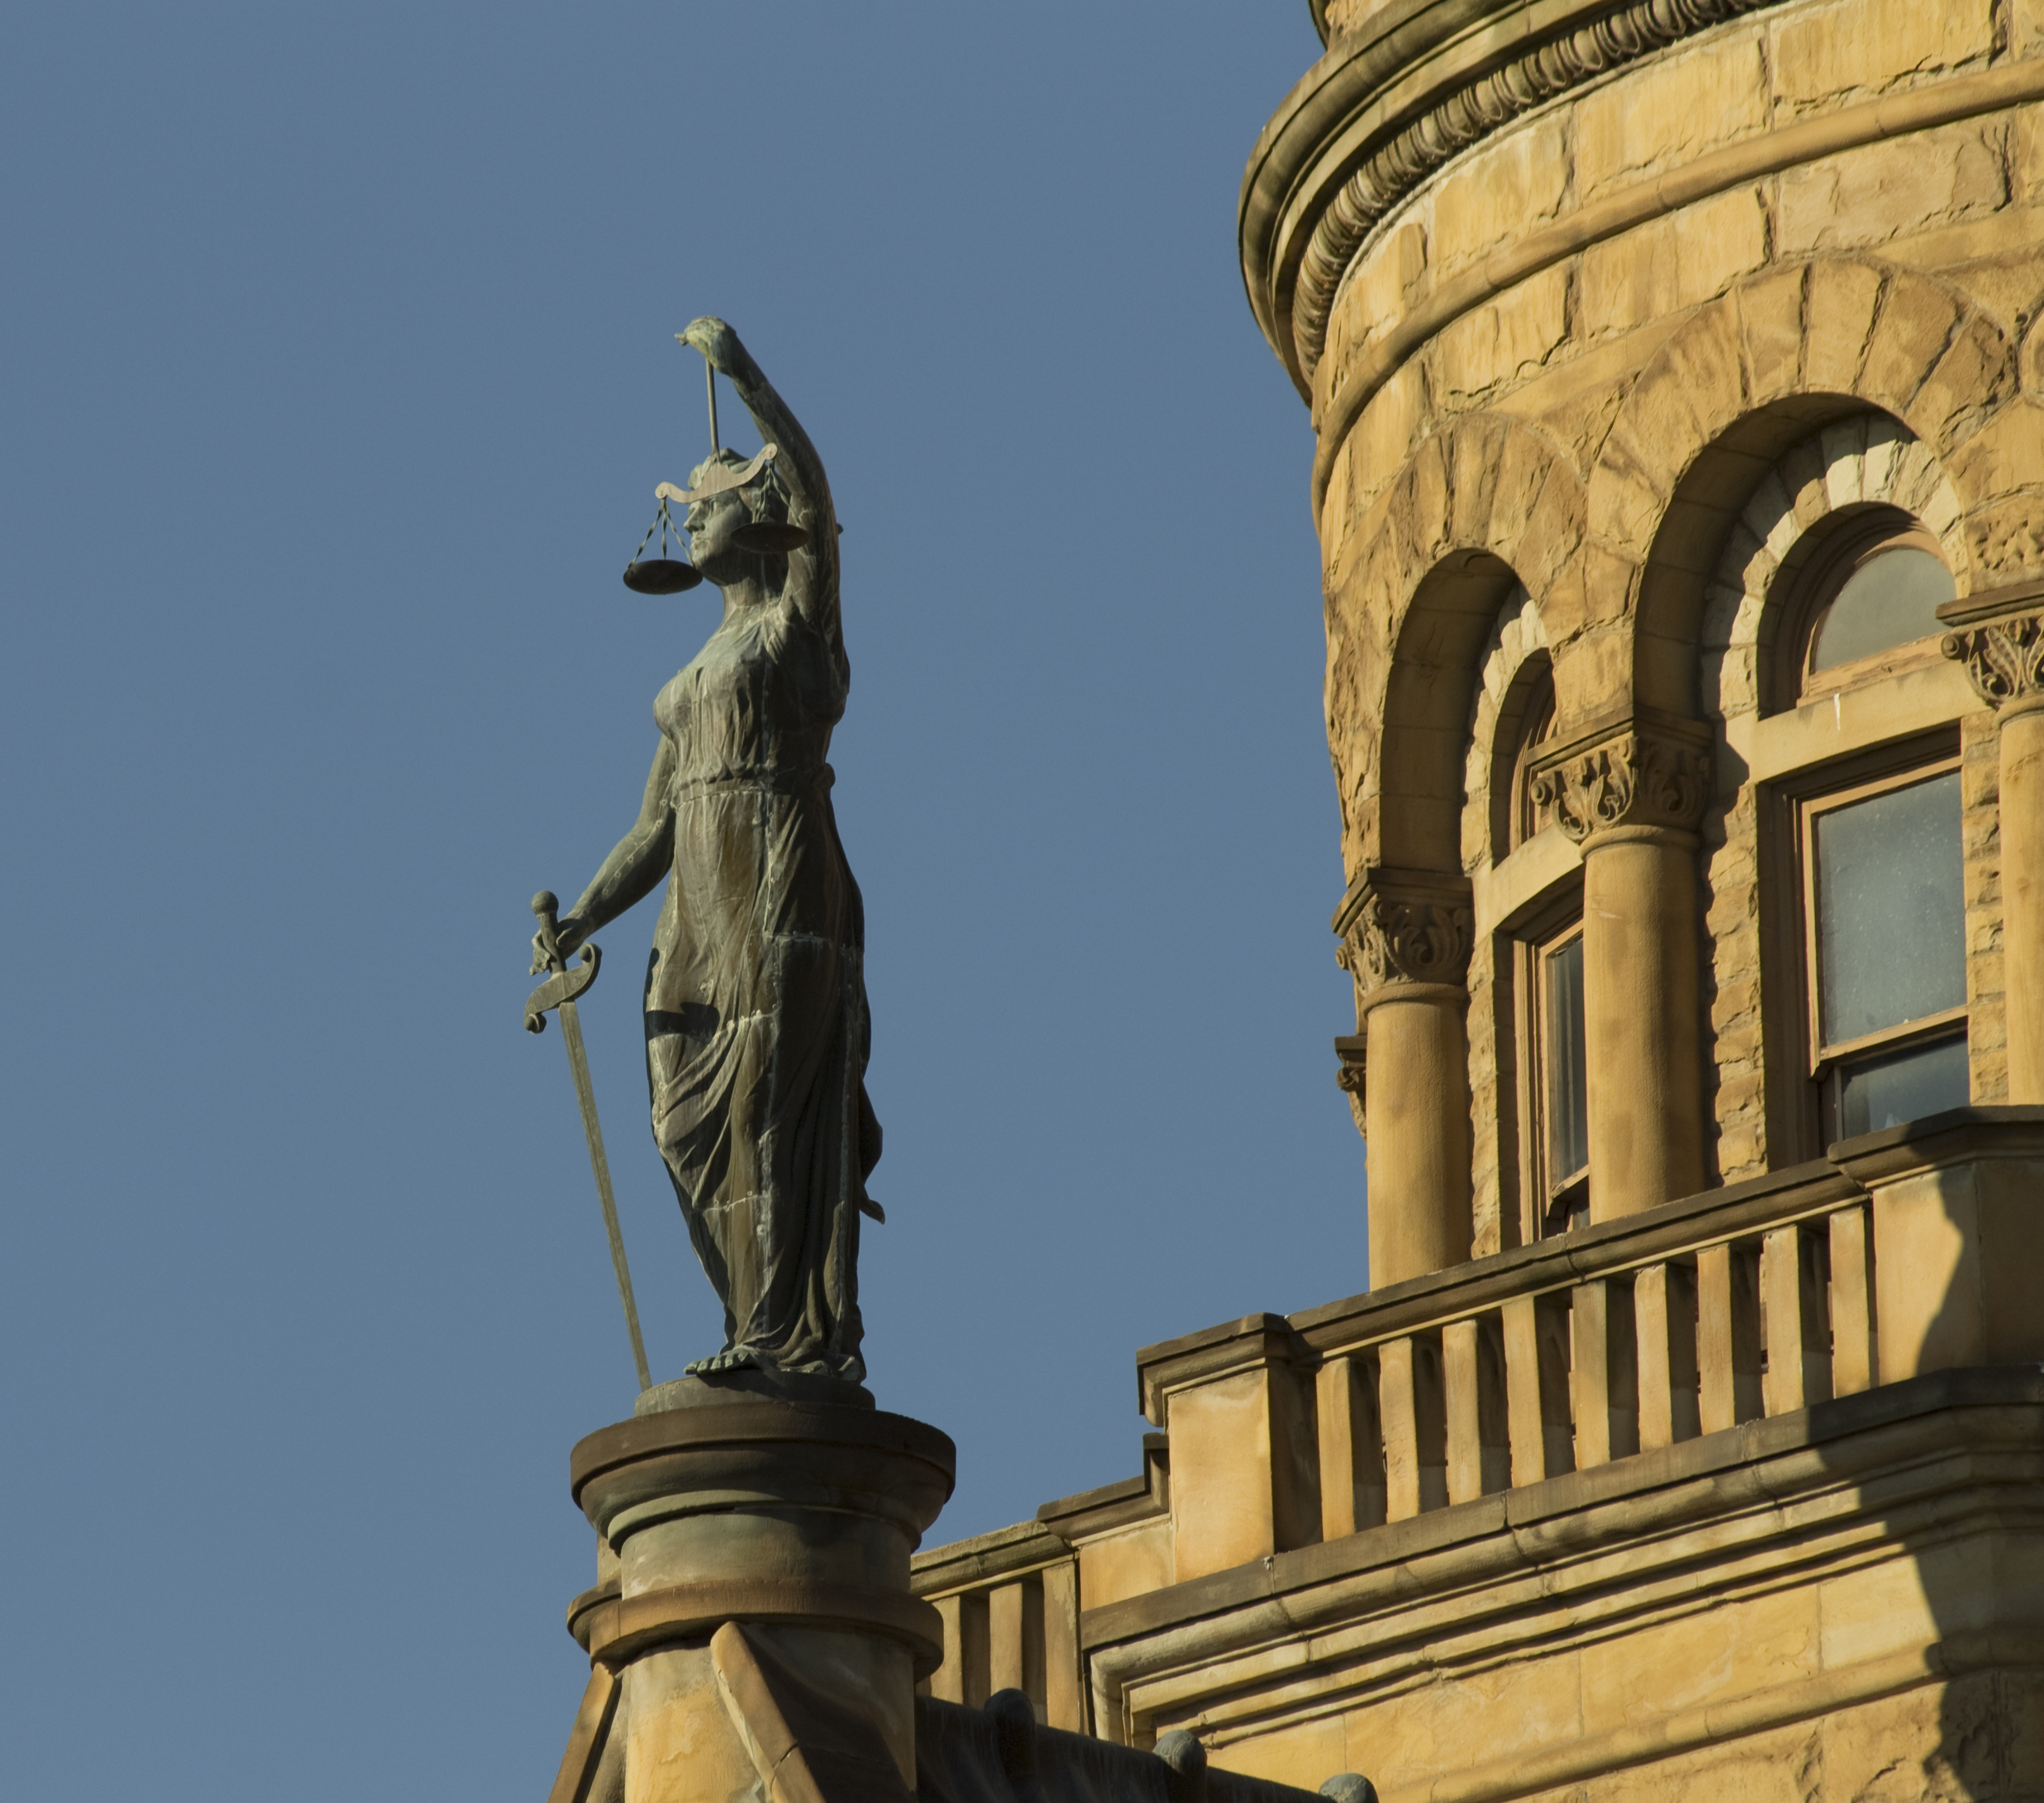 Statue of "Lady of Justice" in front of a courthouse dome.